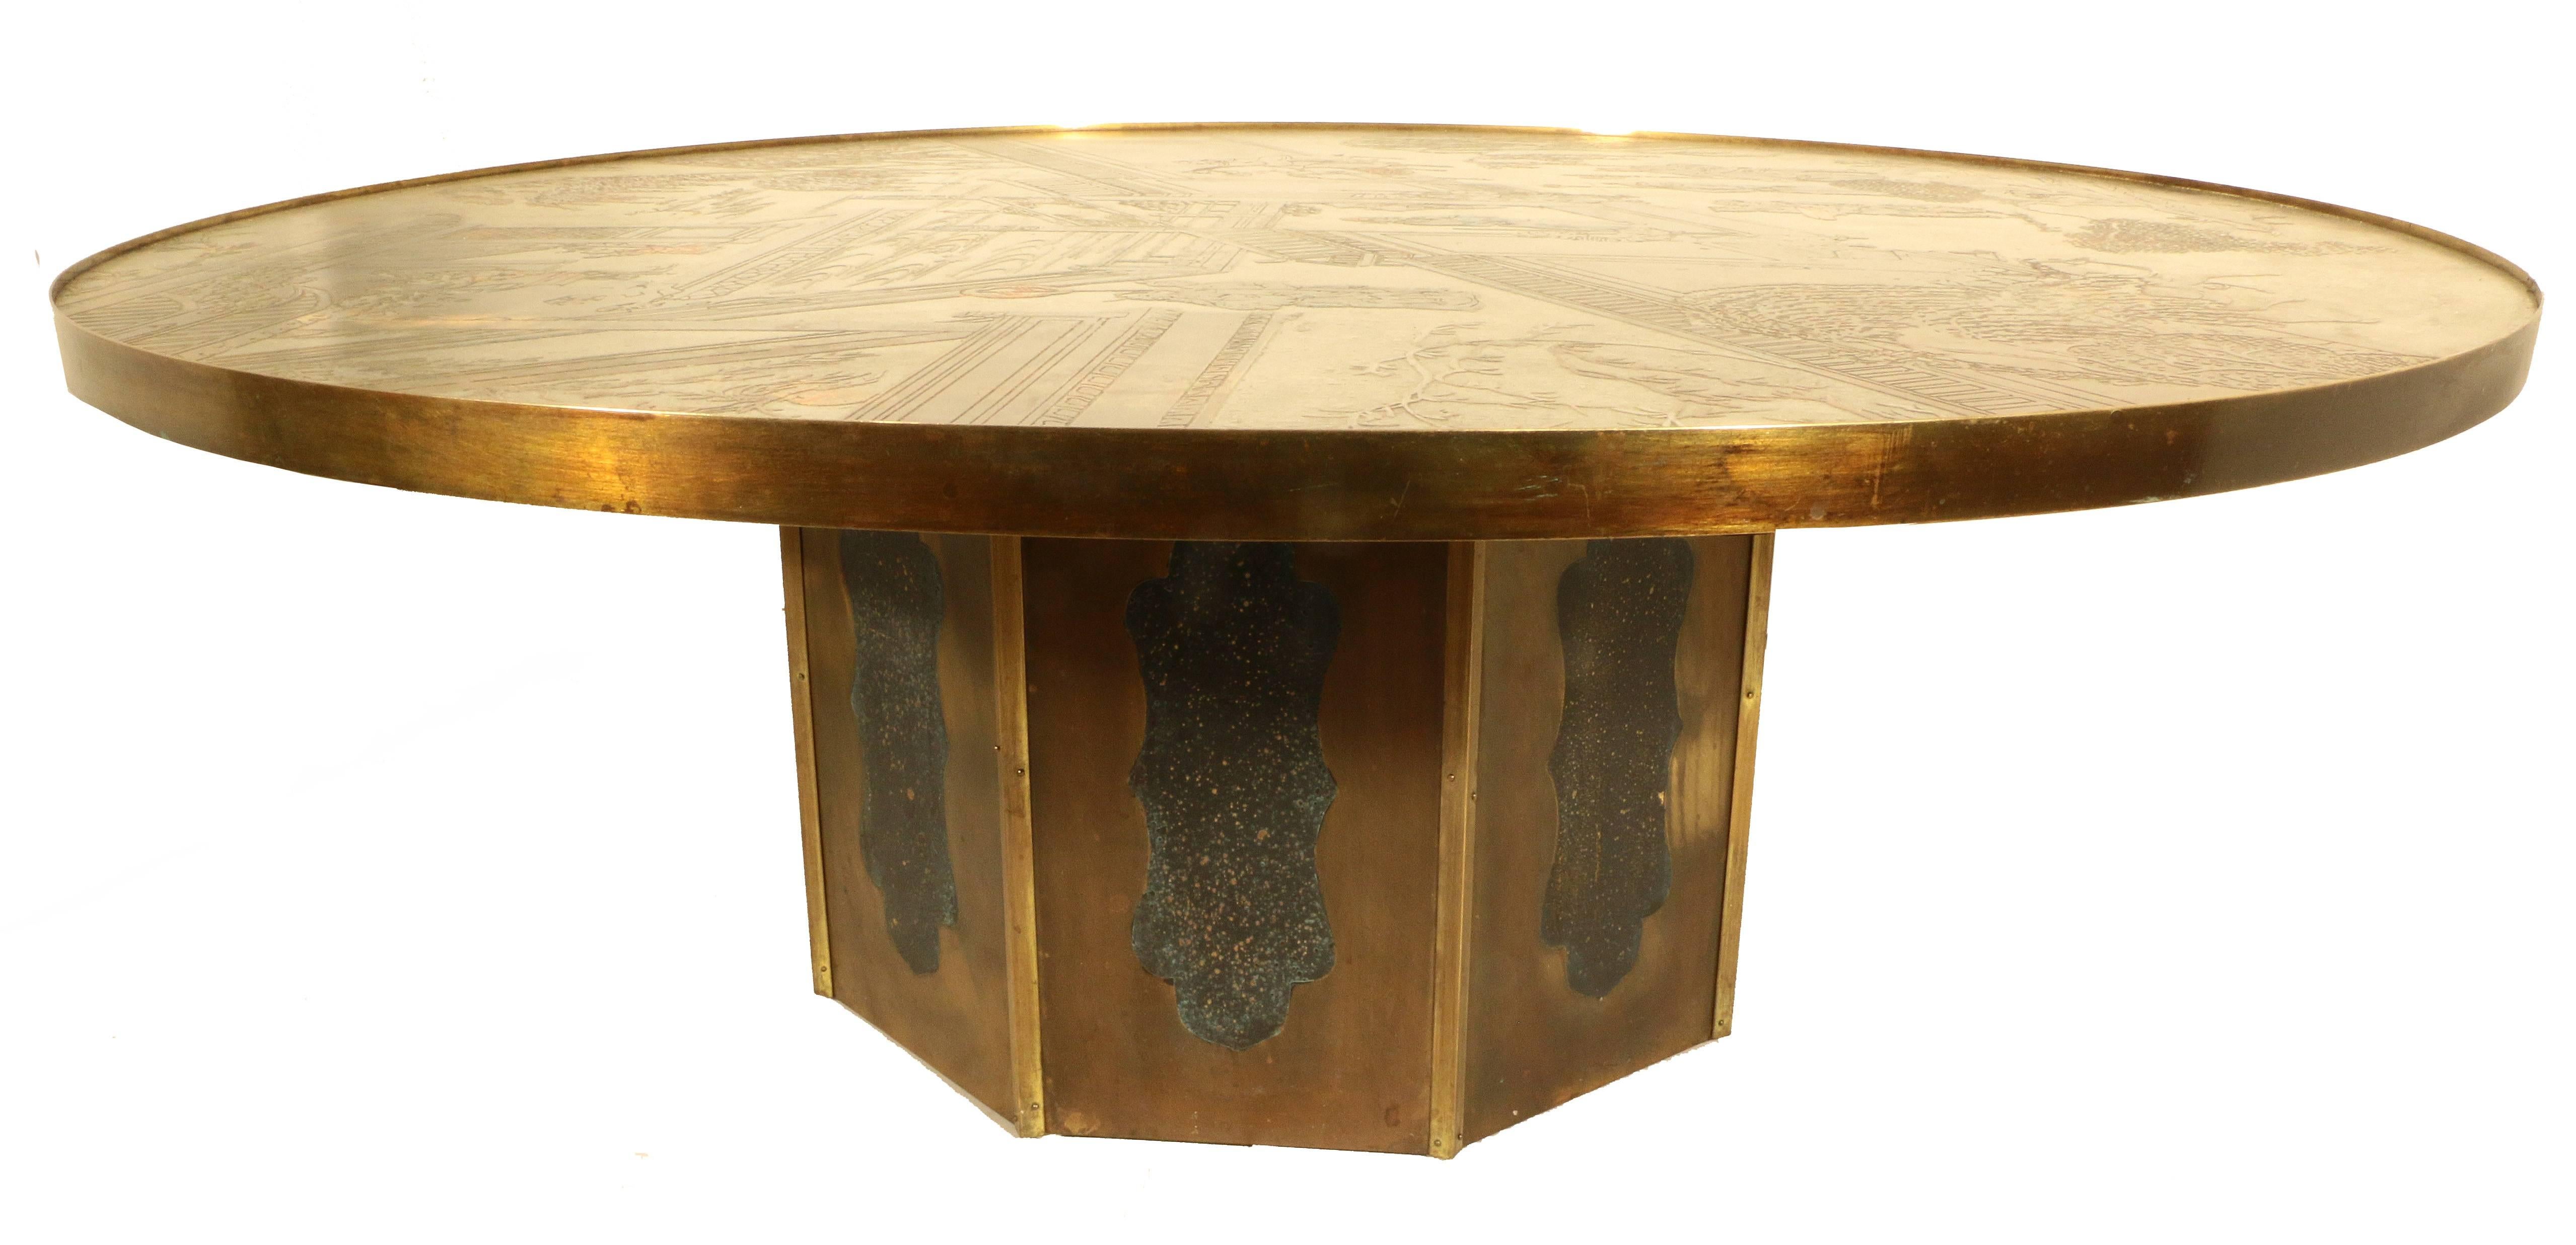 This Mid-Century modern table is ingeniously acid etched, polished, patinated and painted. Made by important American craftsmen, the Chinoiserie scene depicts figures and horses in a walled compound set amidst arbors of wisteria and willow. The